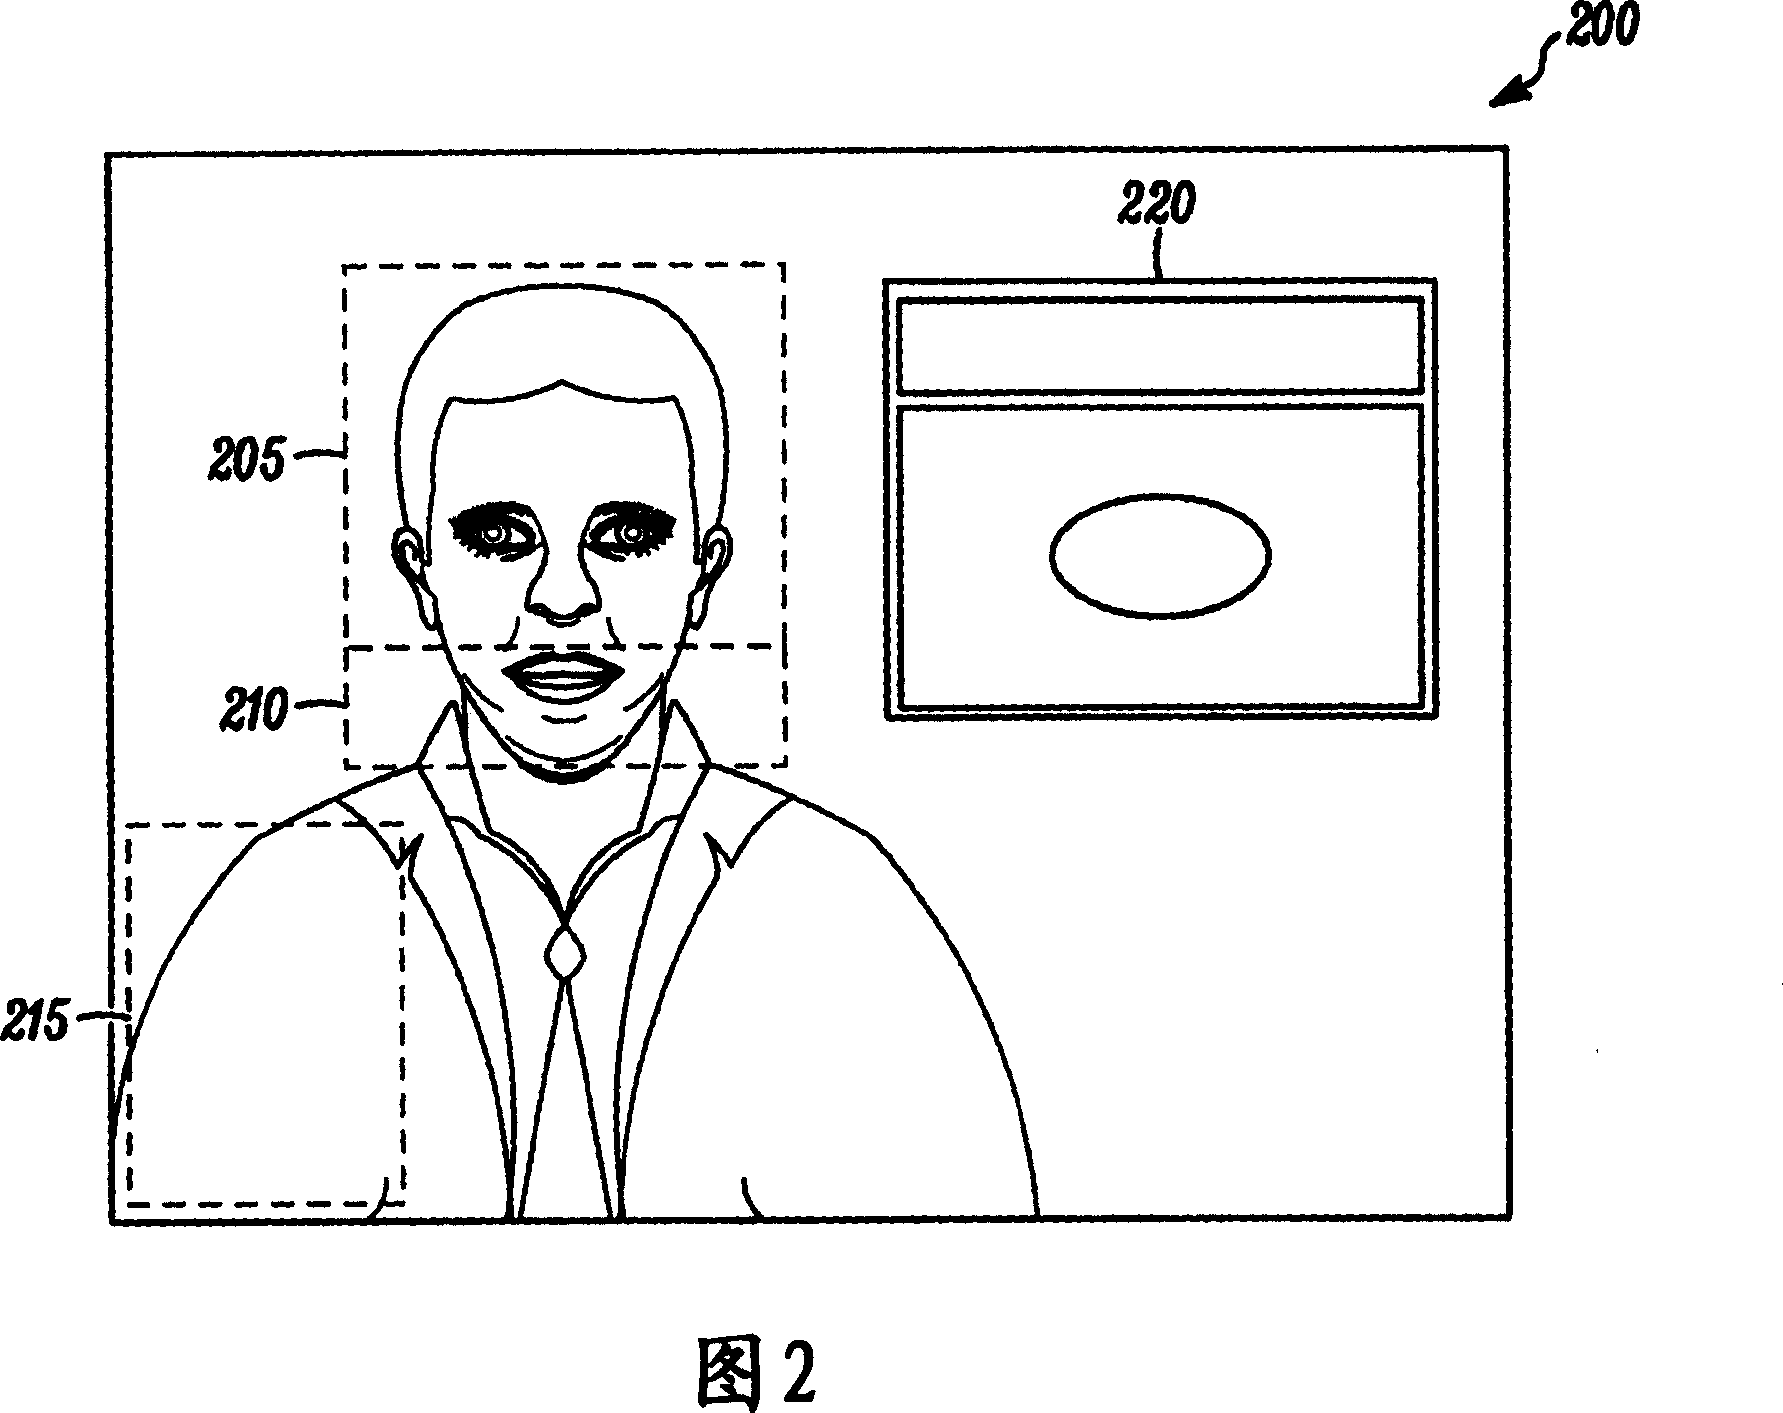 Method of activating image by using voice data